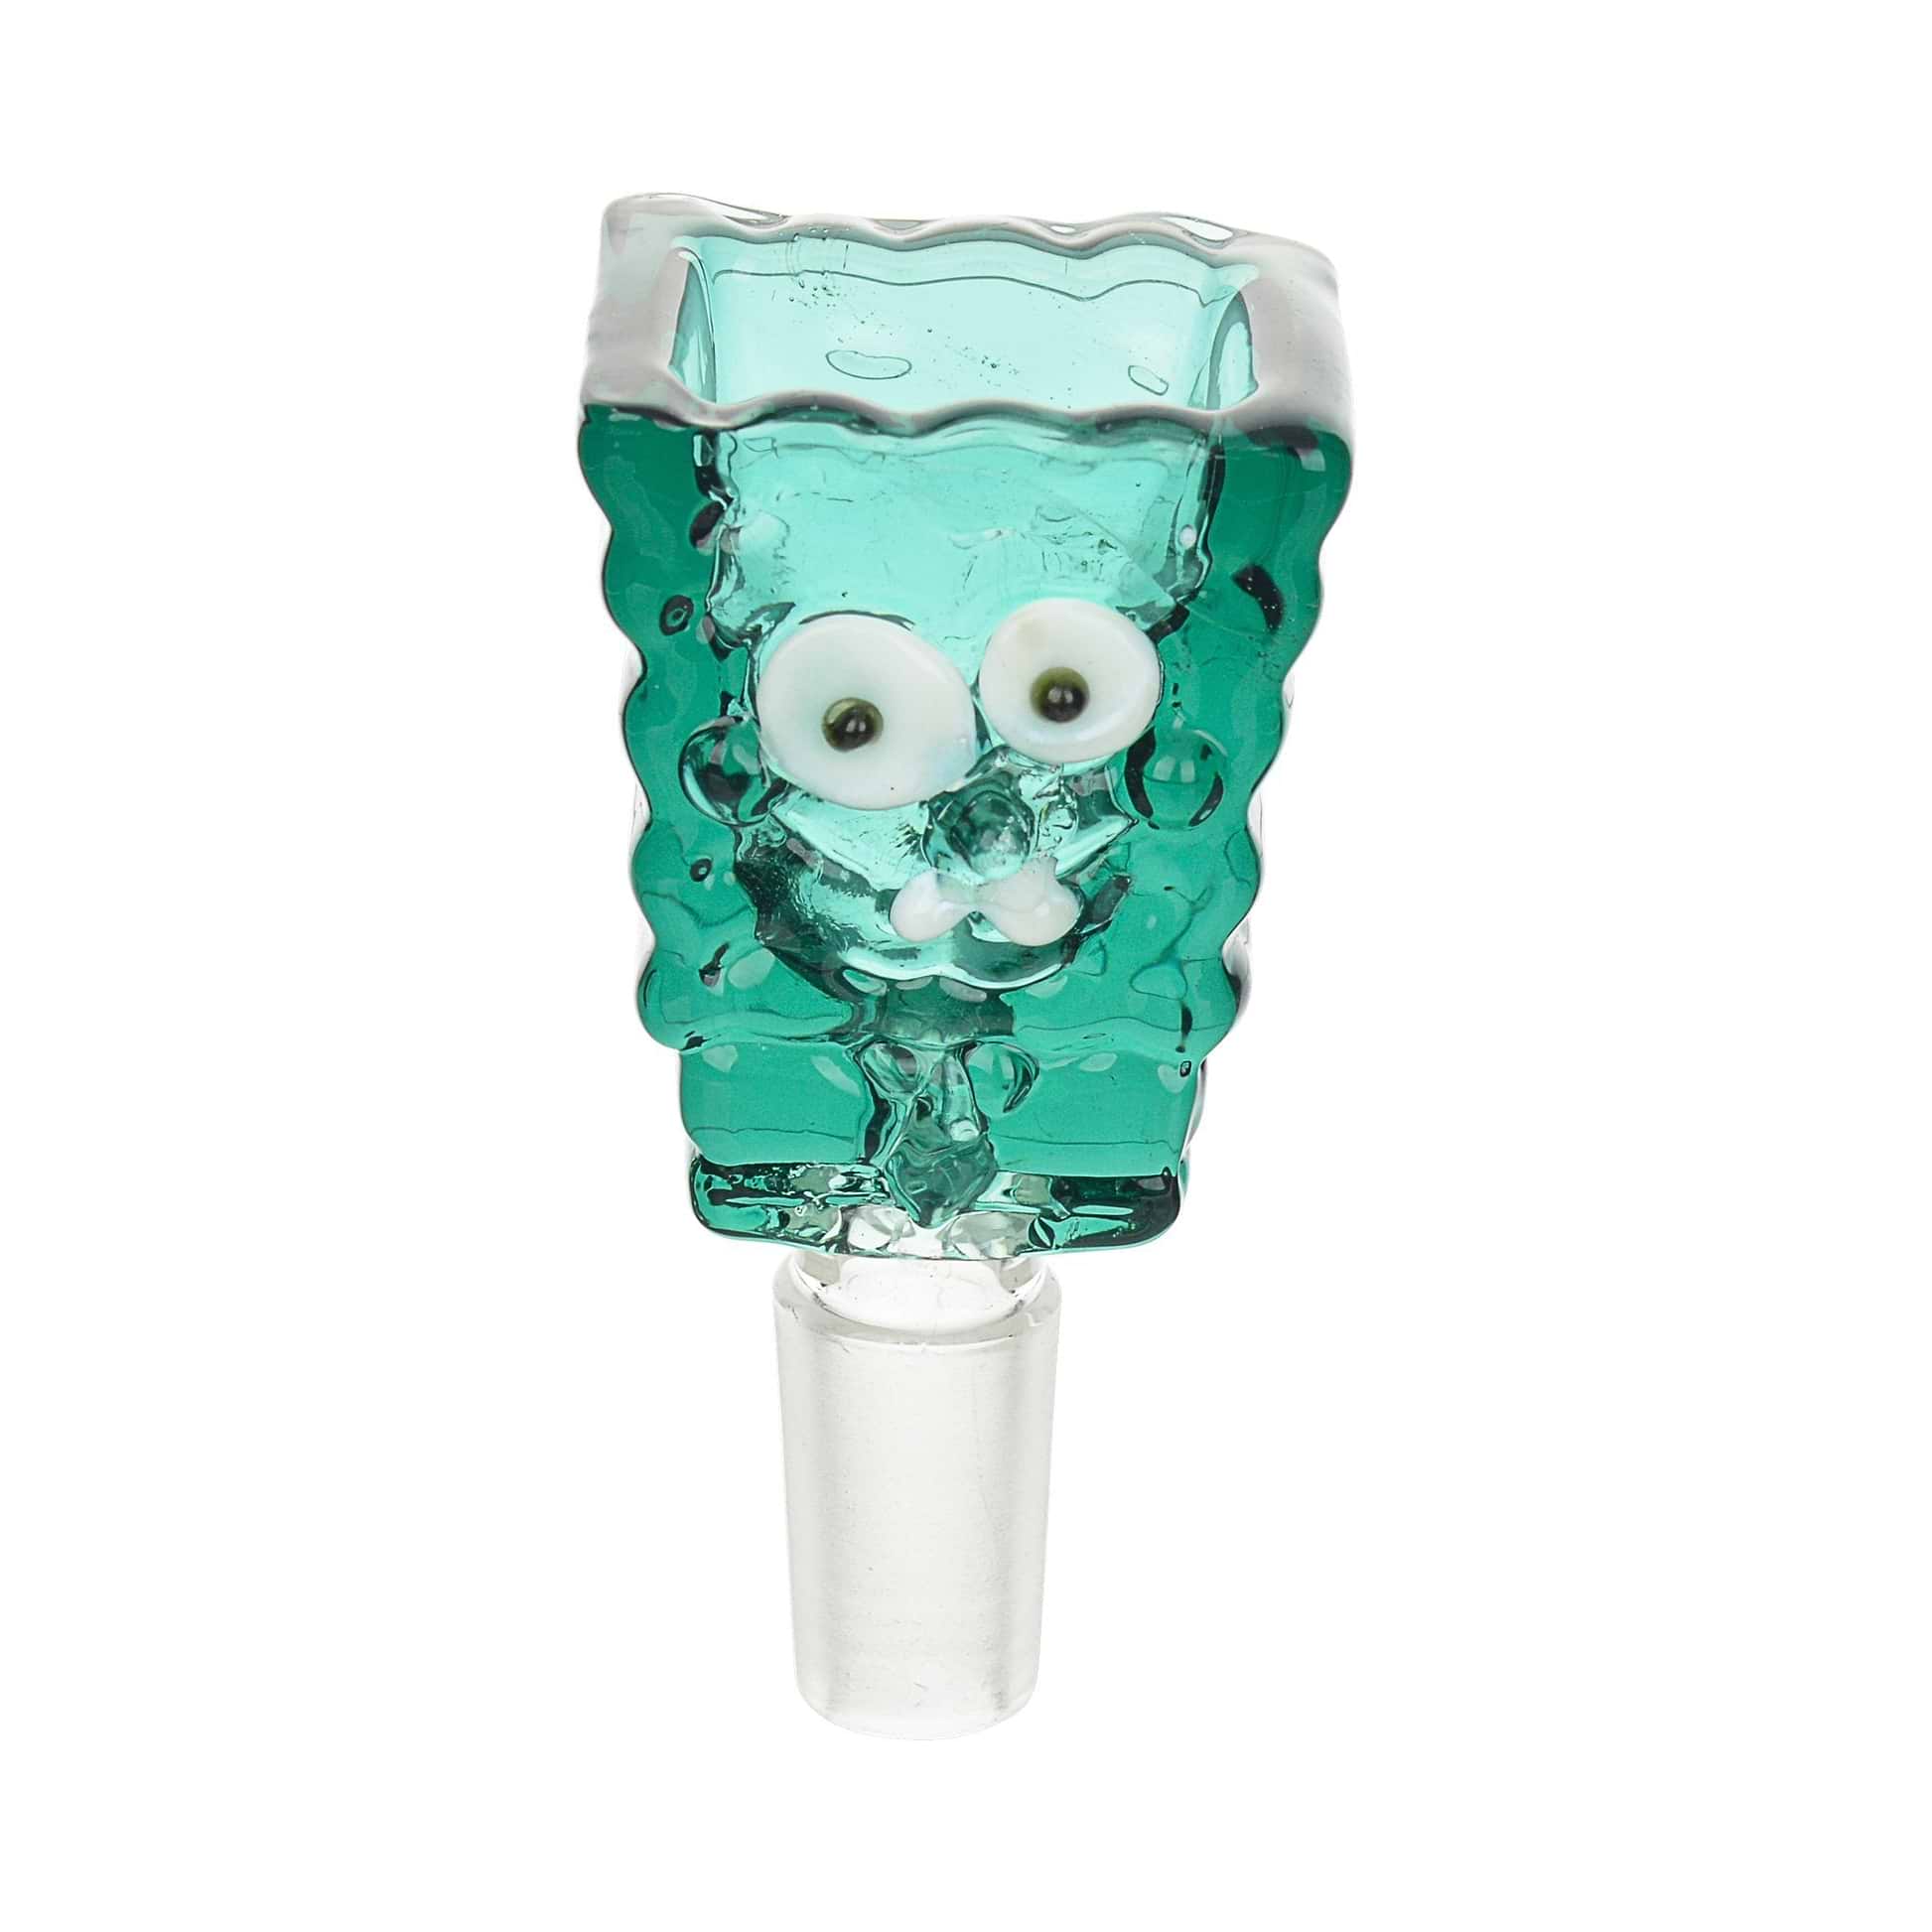 Teal 14mm cartoon-inspired glass bowl for male joint bong accessory bowl designed with funny sculpted face of Spongebob